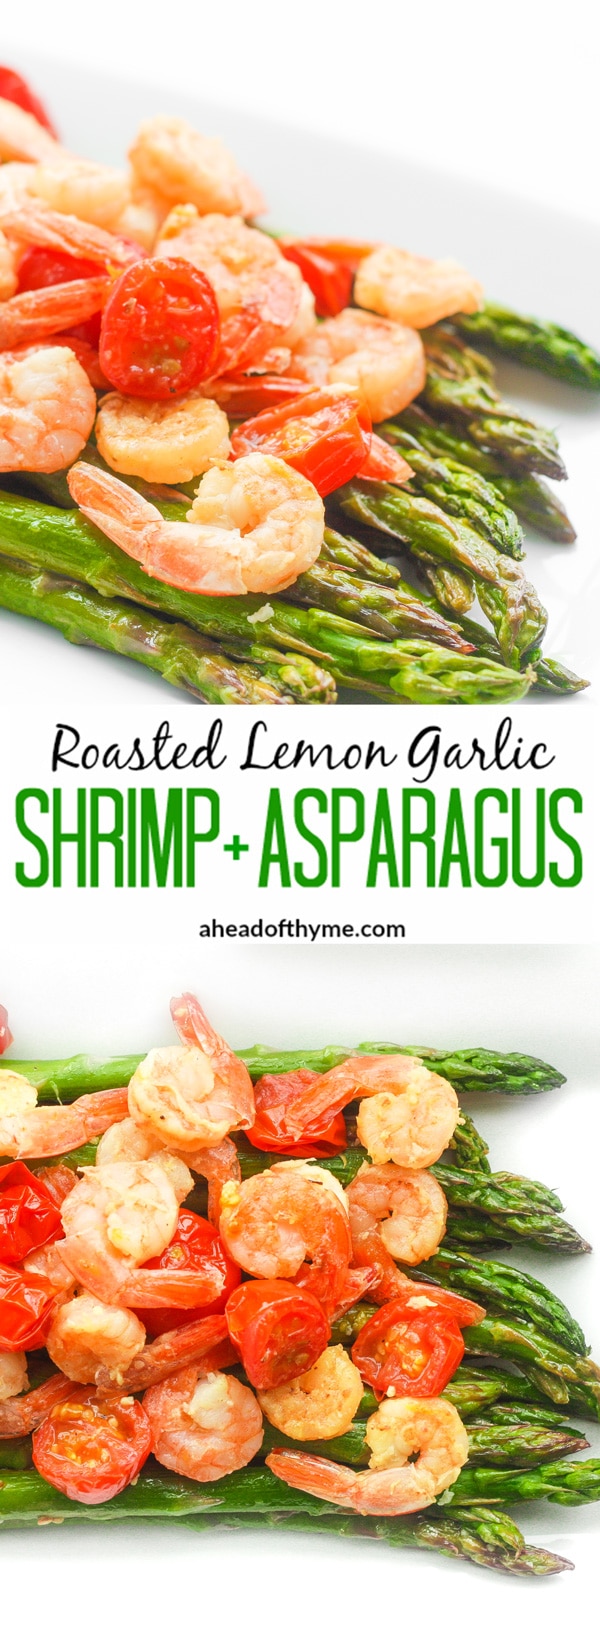 Roasted Lemon Garlic Shrimp and Asparagus: Light, fresh and vibrant, roasted lemon garlic shrimp and asparagus is the perfect dish for the spring and upcoming summer season | aheadofthyme.com